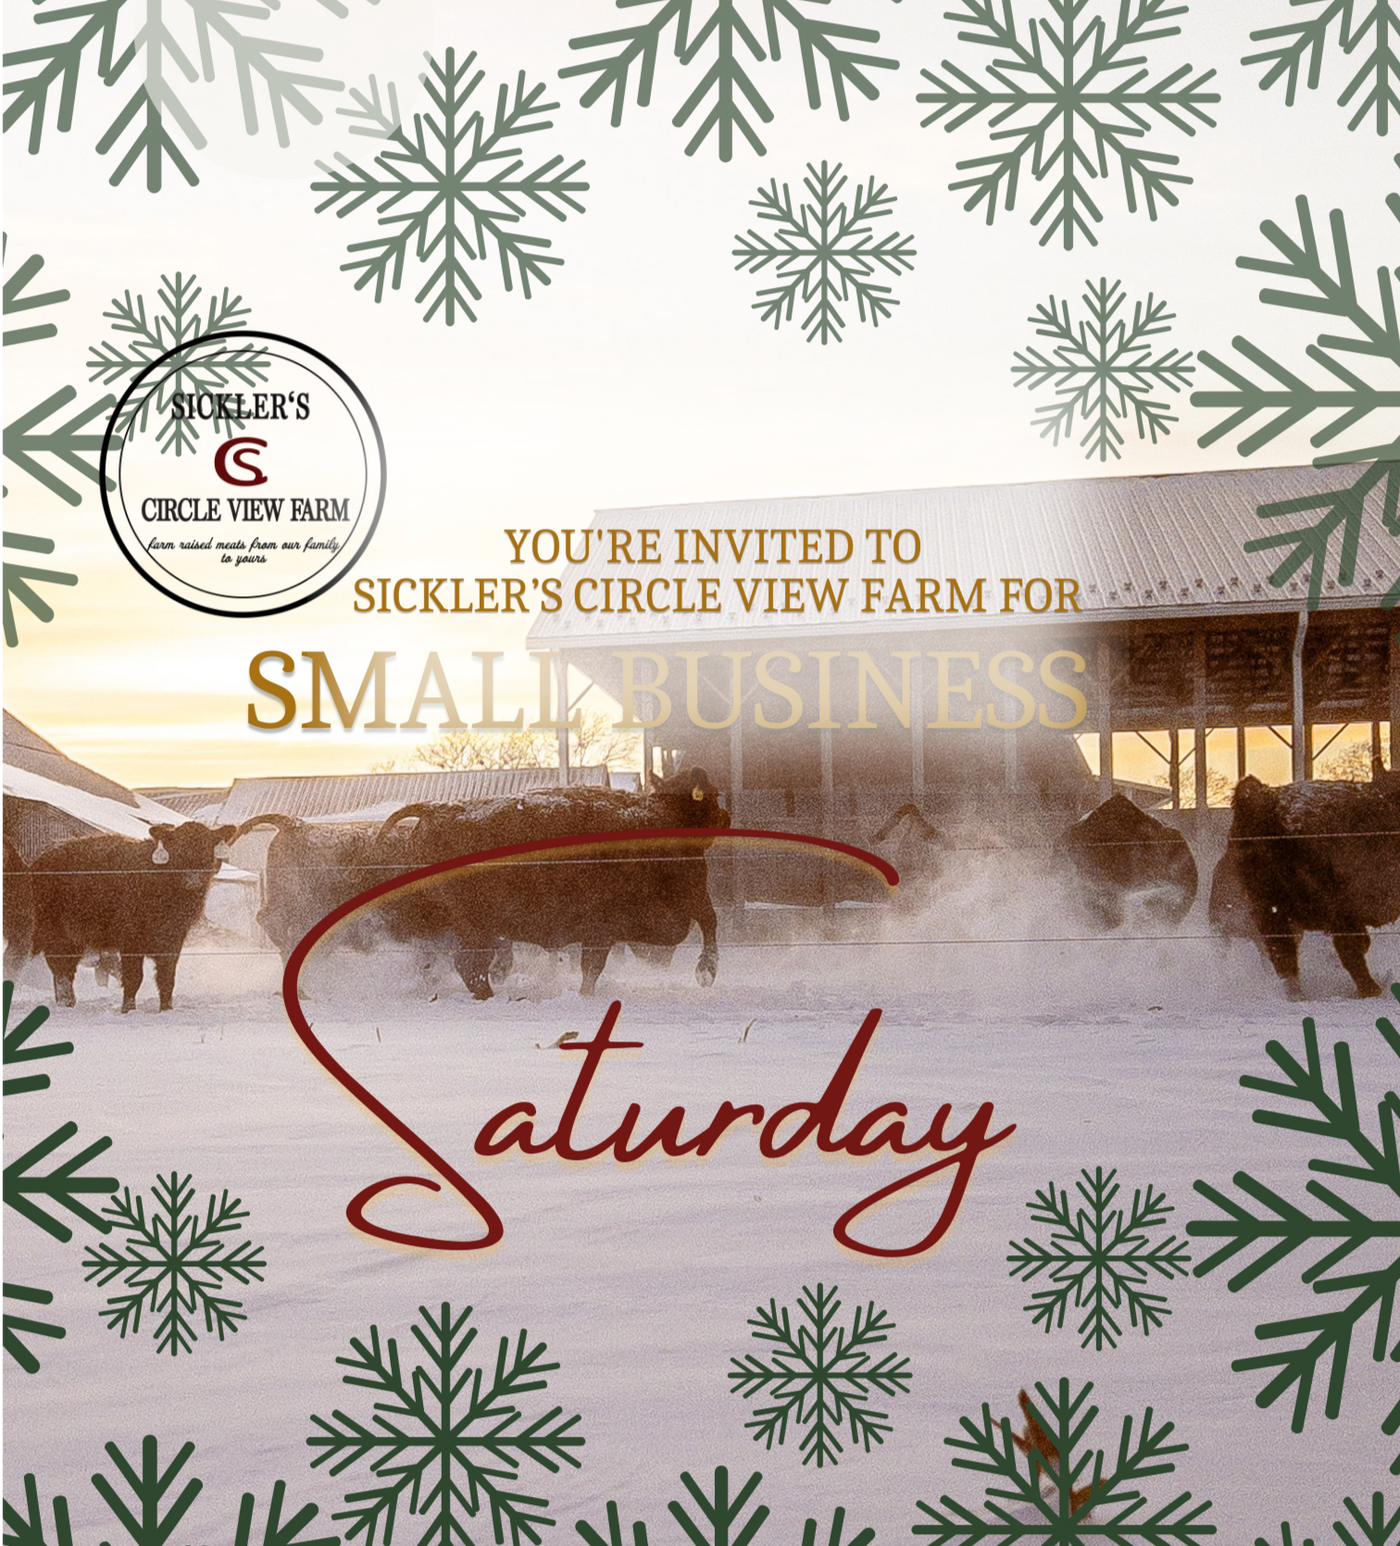 Small Business Saturday Event Vendor Table Reservation- Nov. 25th, 2023 10:00AM-4:00PM